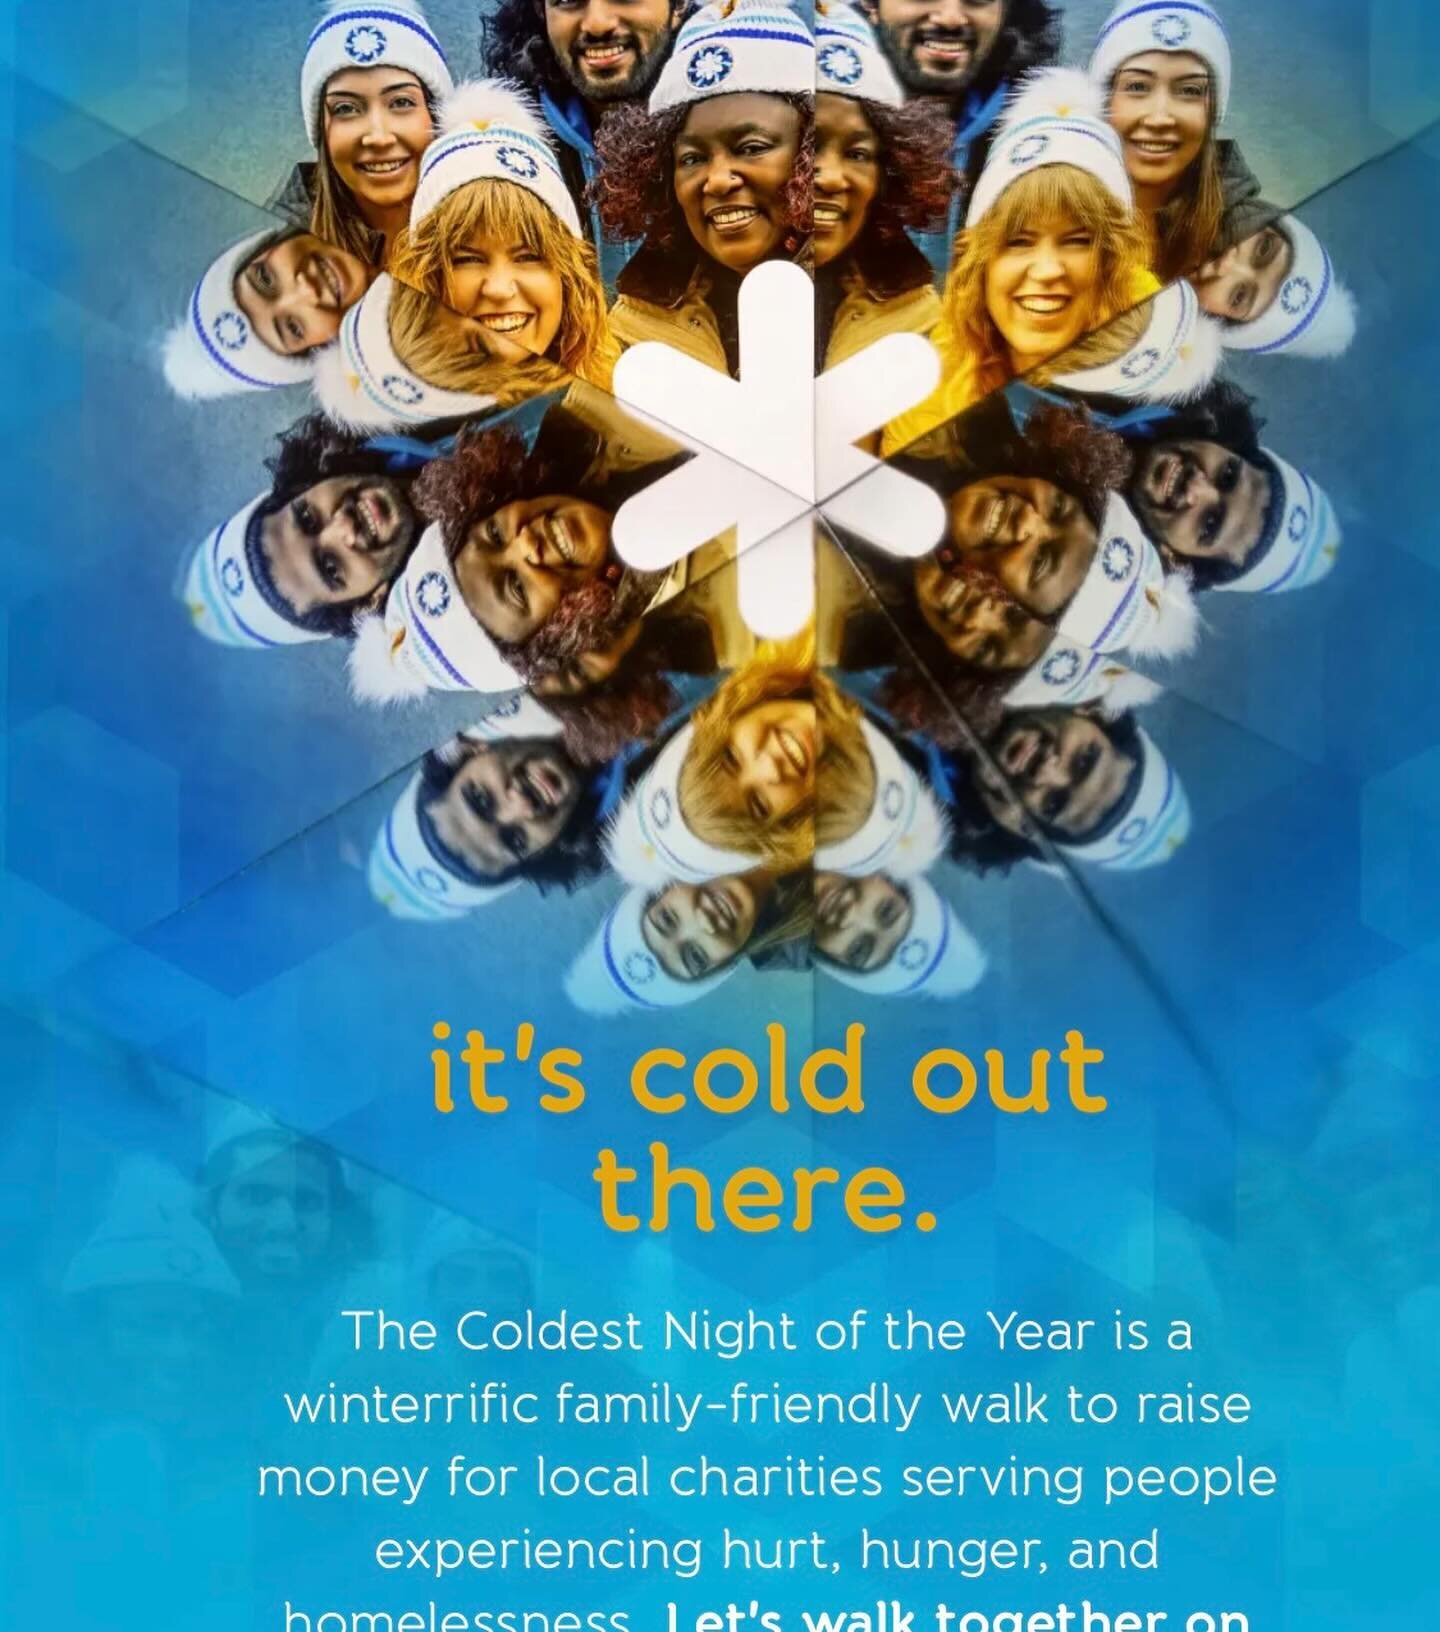 Coldest night of the year is a charity fundraiser, raising money for your community to use for people who are hungry, homeless, etc. Go to cnoy.org and select your community and support a team that is fundraising. I am unable to do the walk myself th